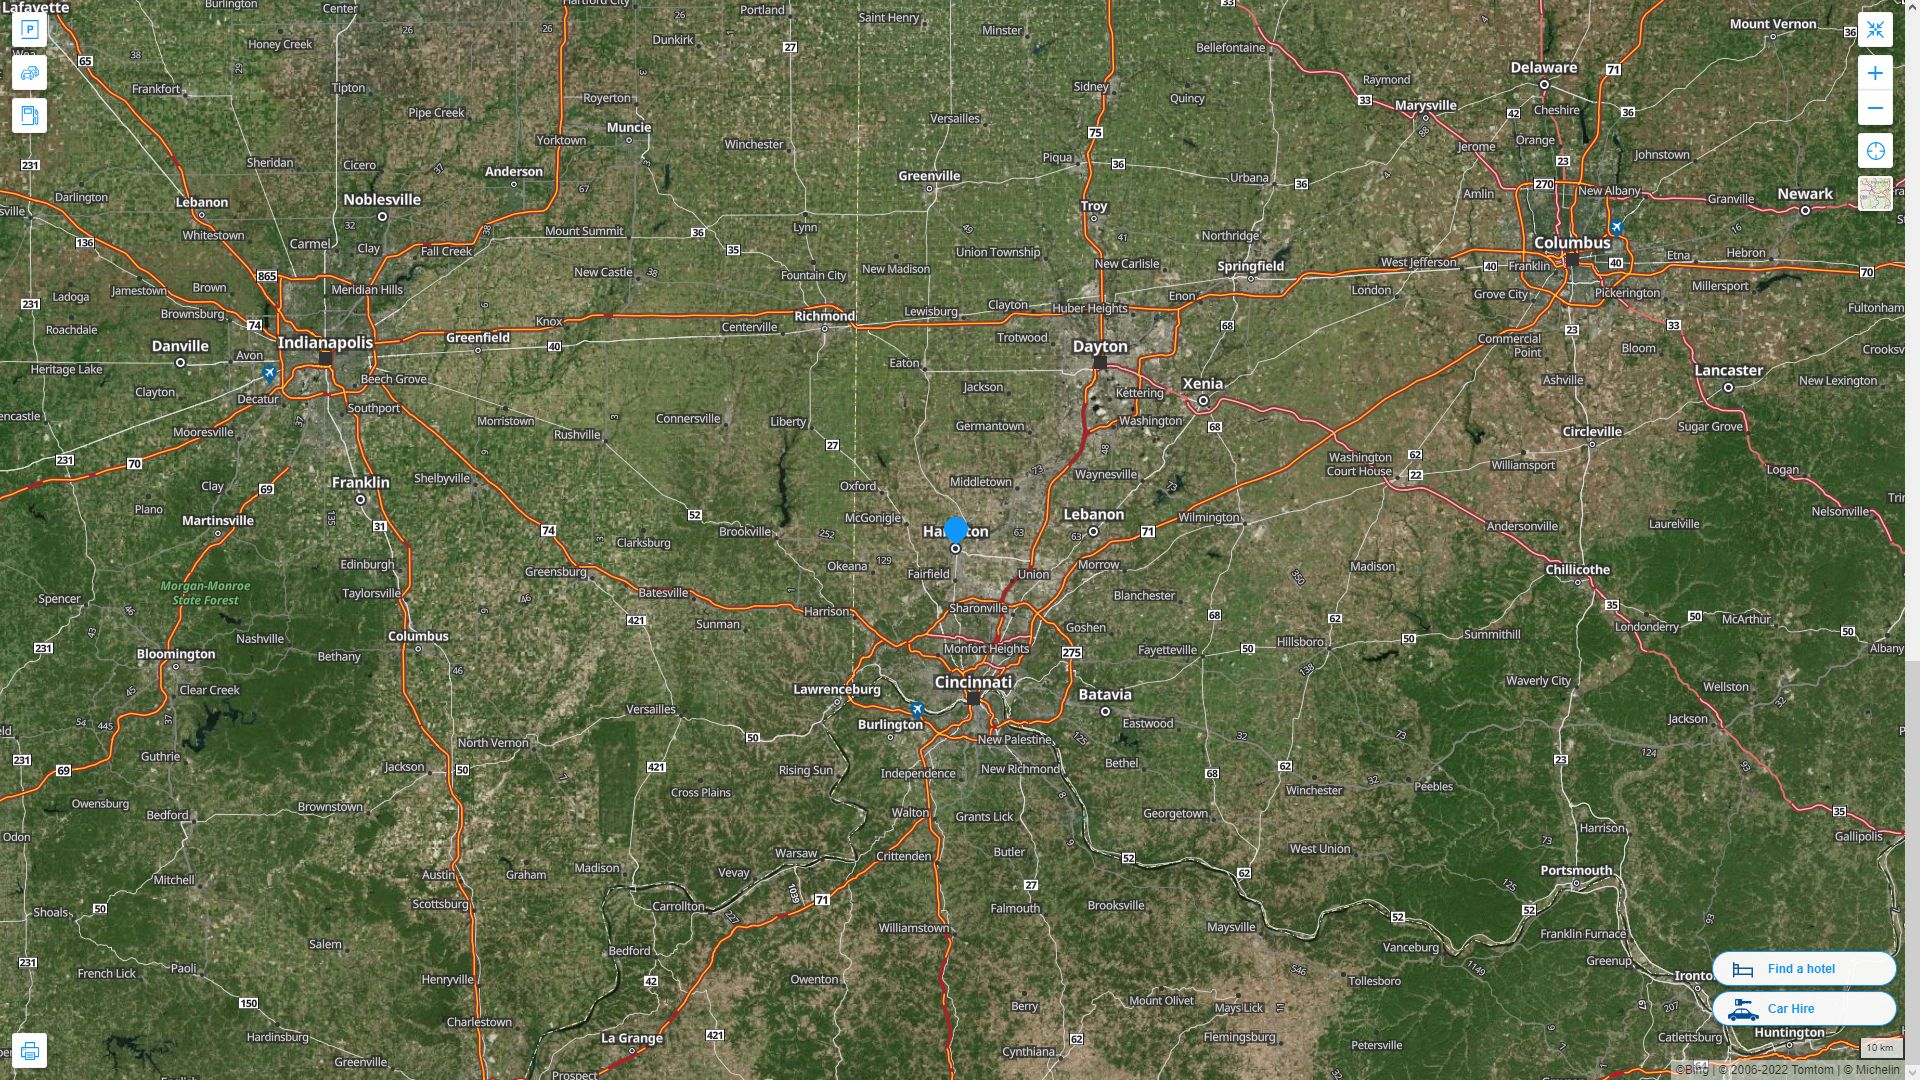 Hamilton Ohio Highway and Road Map with Satellite View